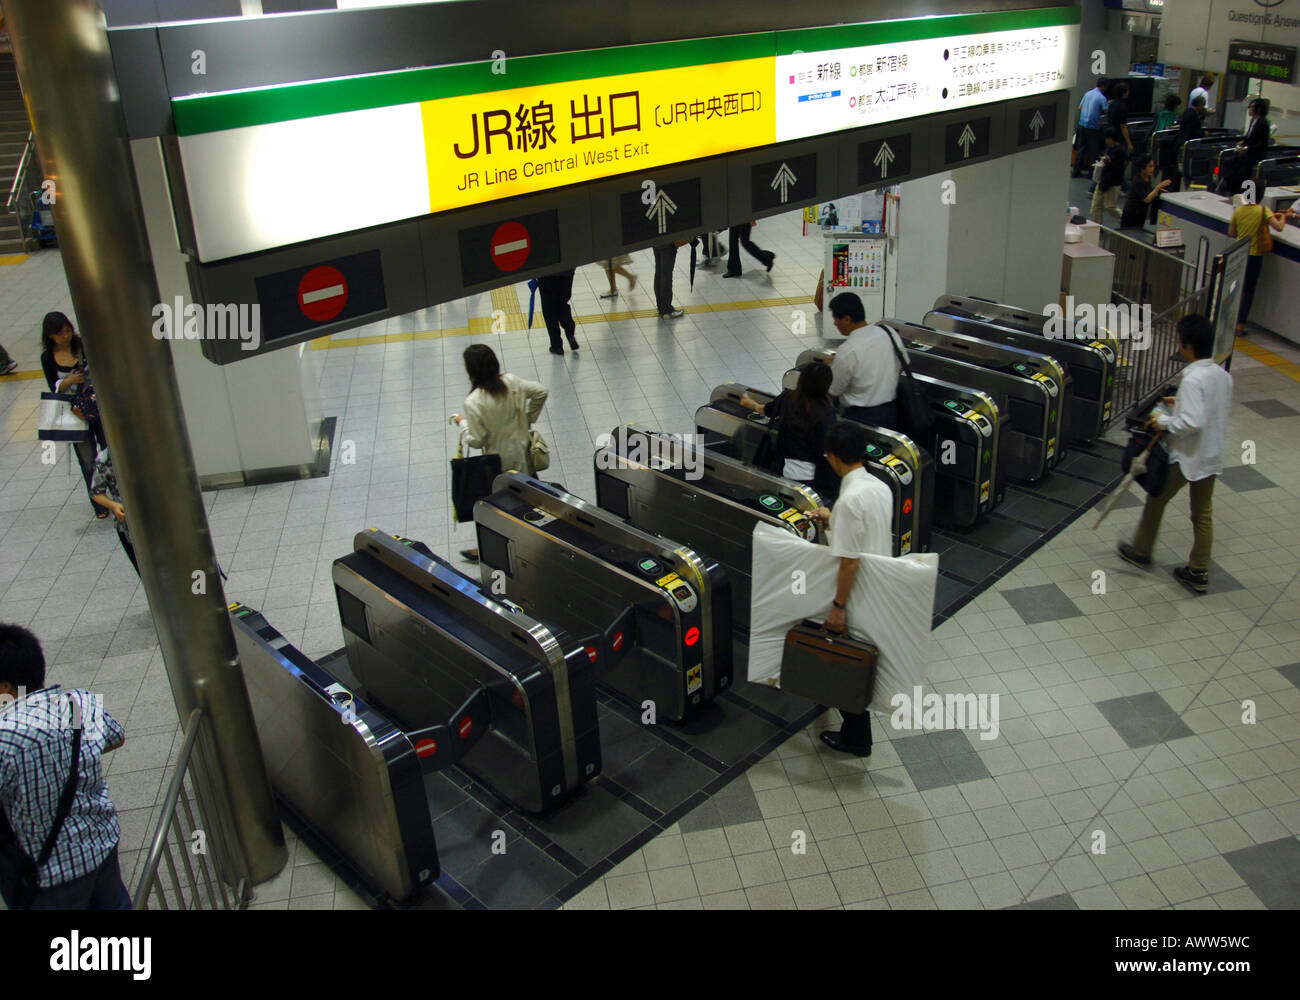 Ticket barriers, Tokyo subway station, Japan Stock Photo